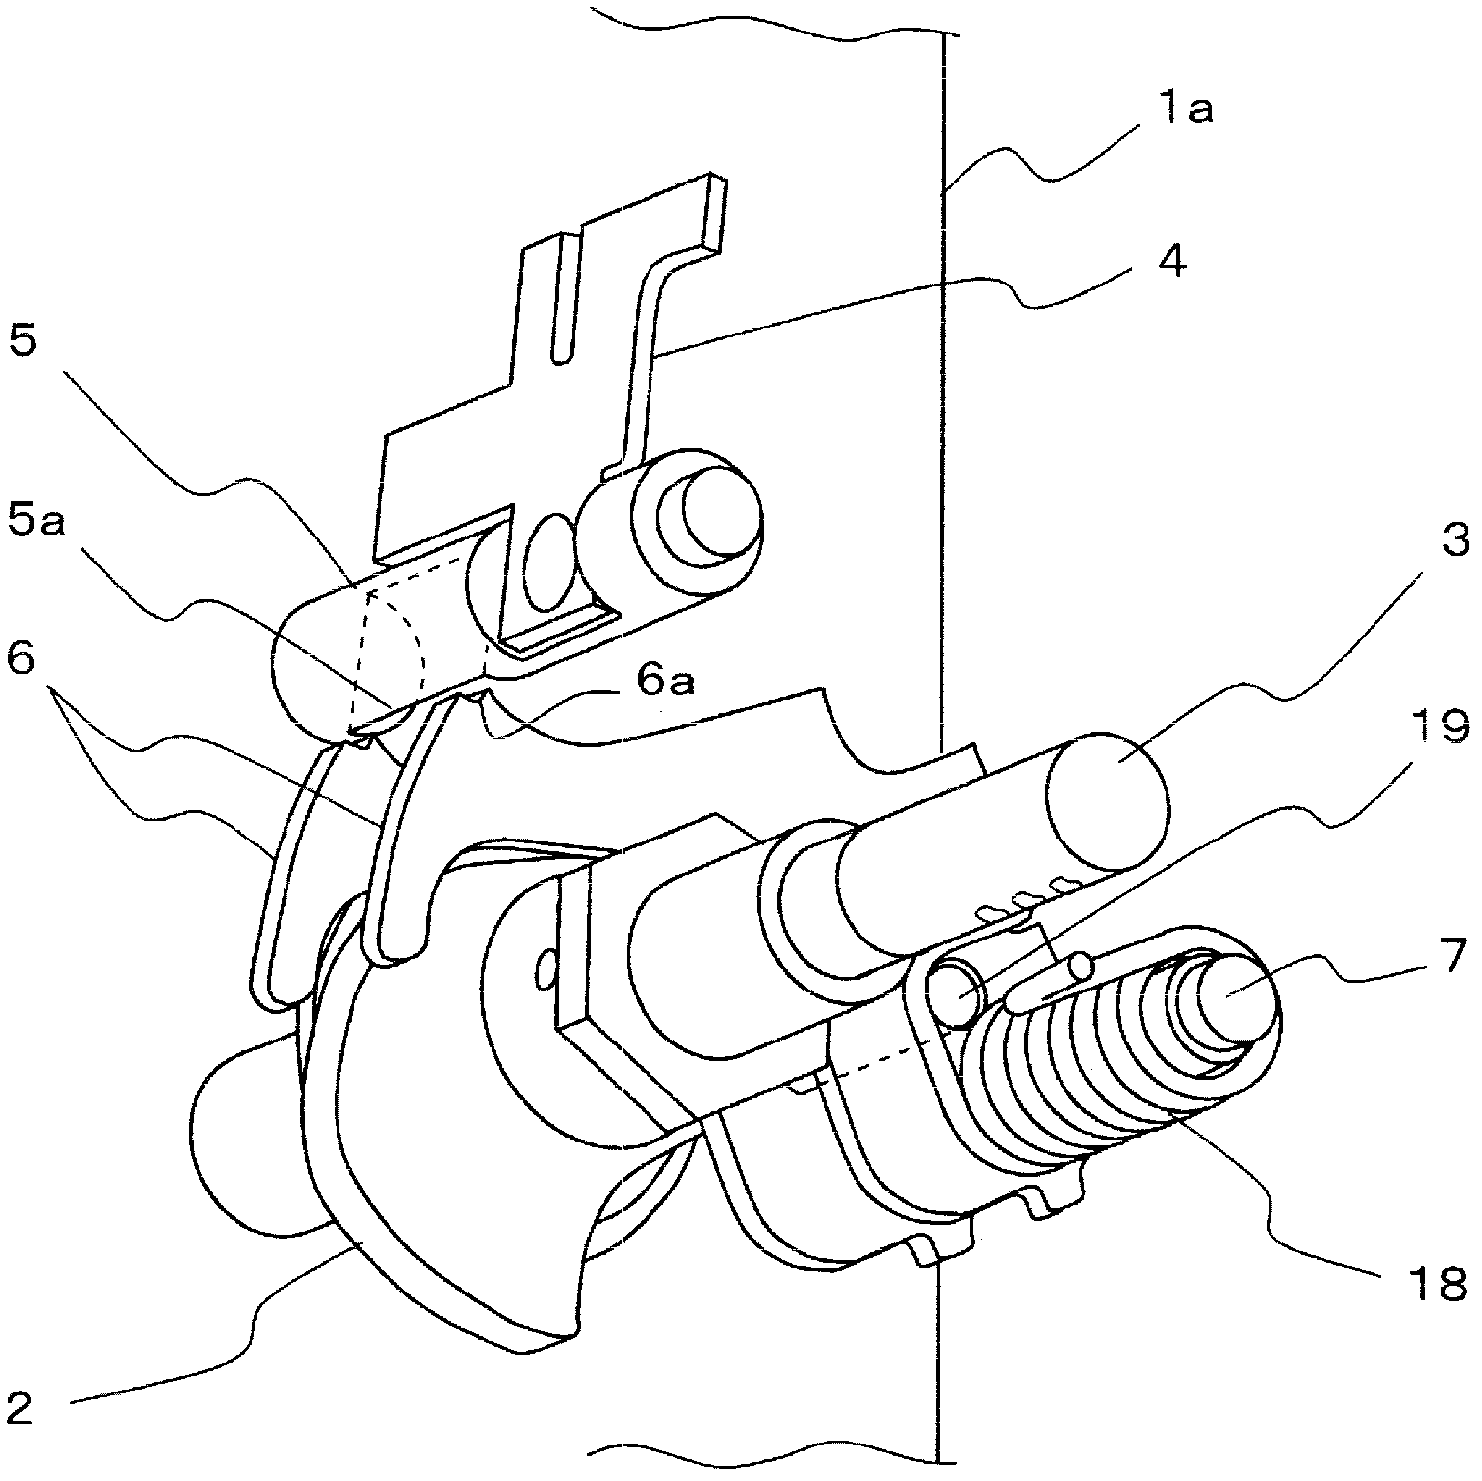 Switch device operating mechanism